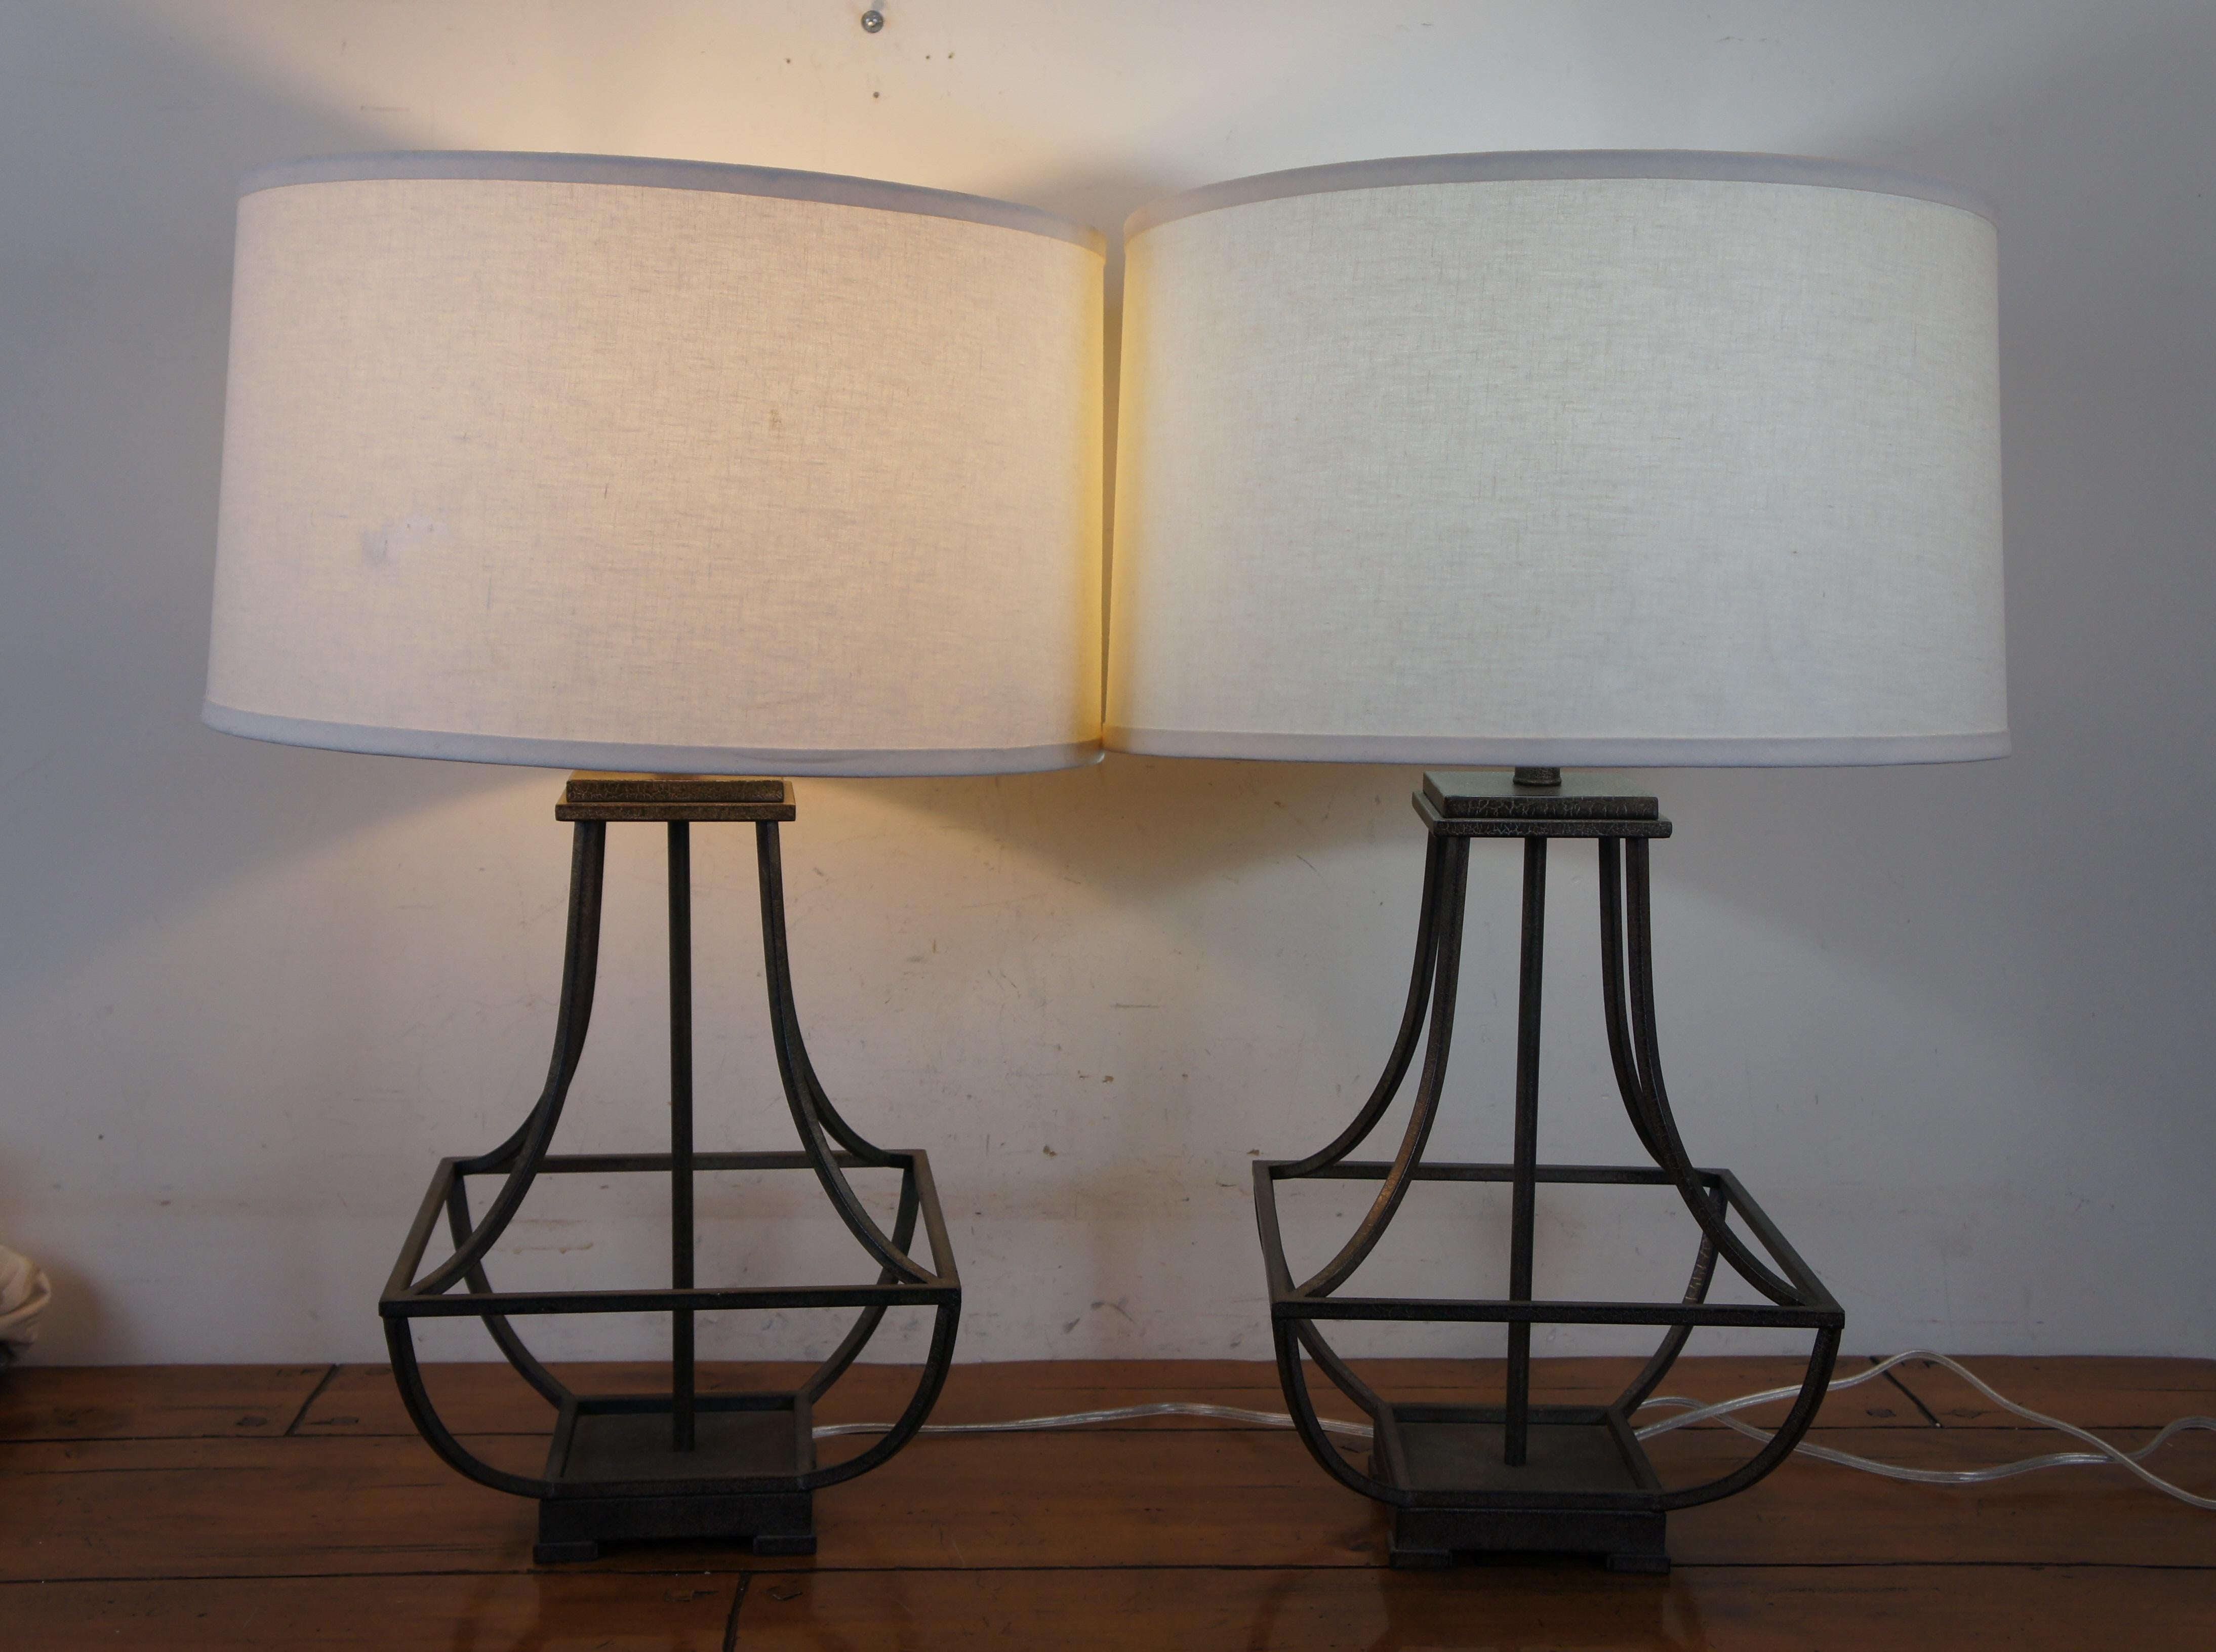 2 Vintage Deerfield Modern Iron Crackle Finish Open Cage Lamps For Sale 6